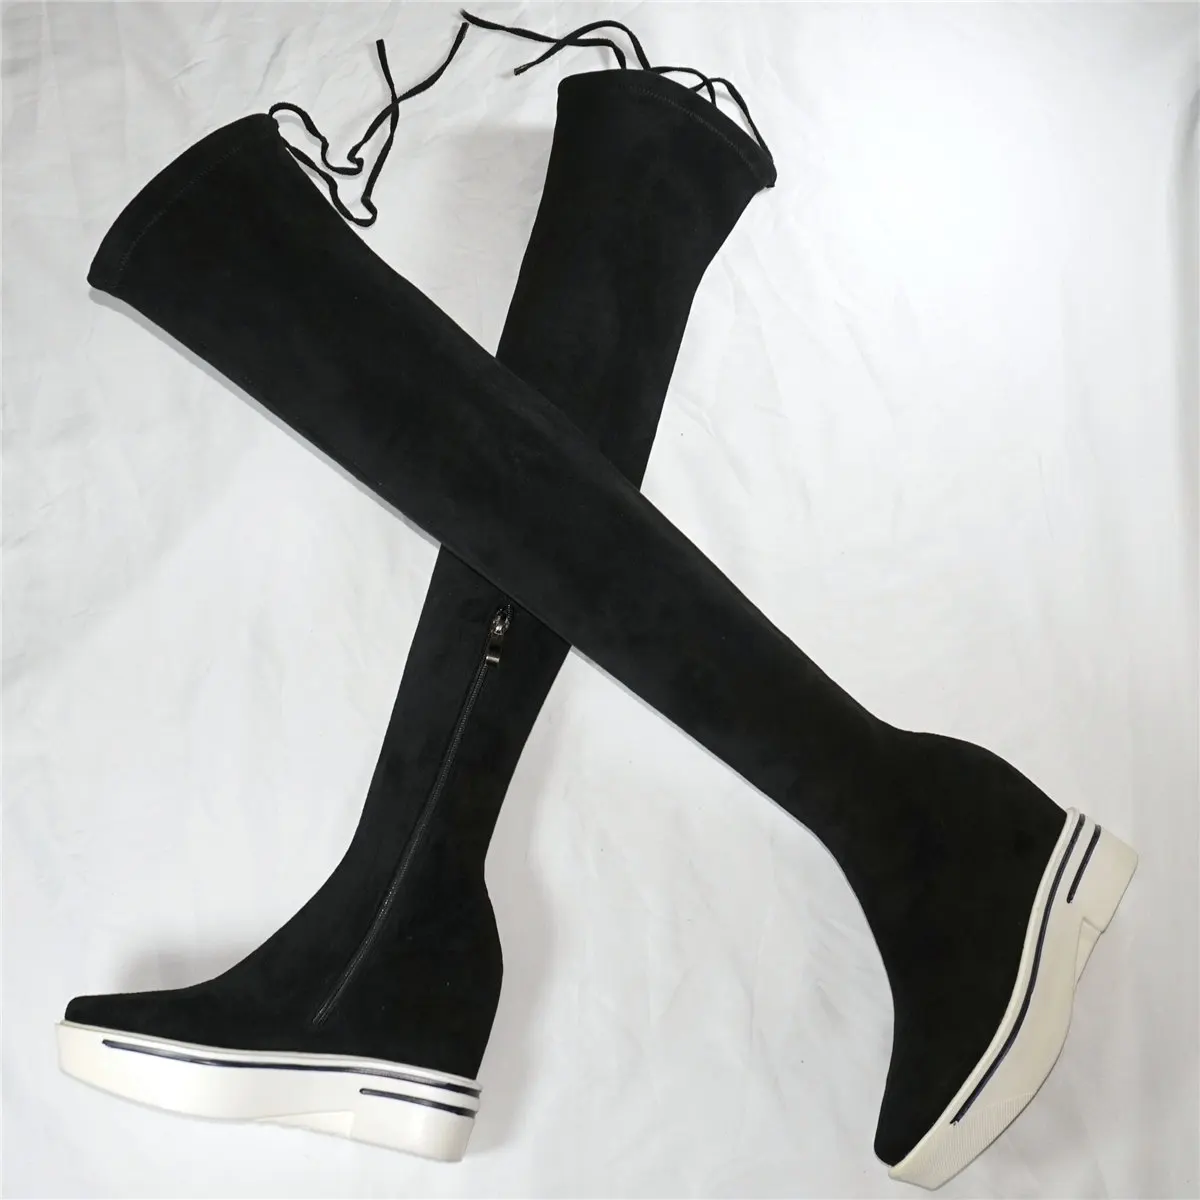 

Fashion Sneakers Women Stretchy Velvet Wedges Over The Knee High Boots Female Pointed Toe High Heel Platform Pumps Casual Shoes